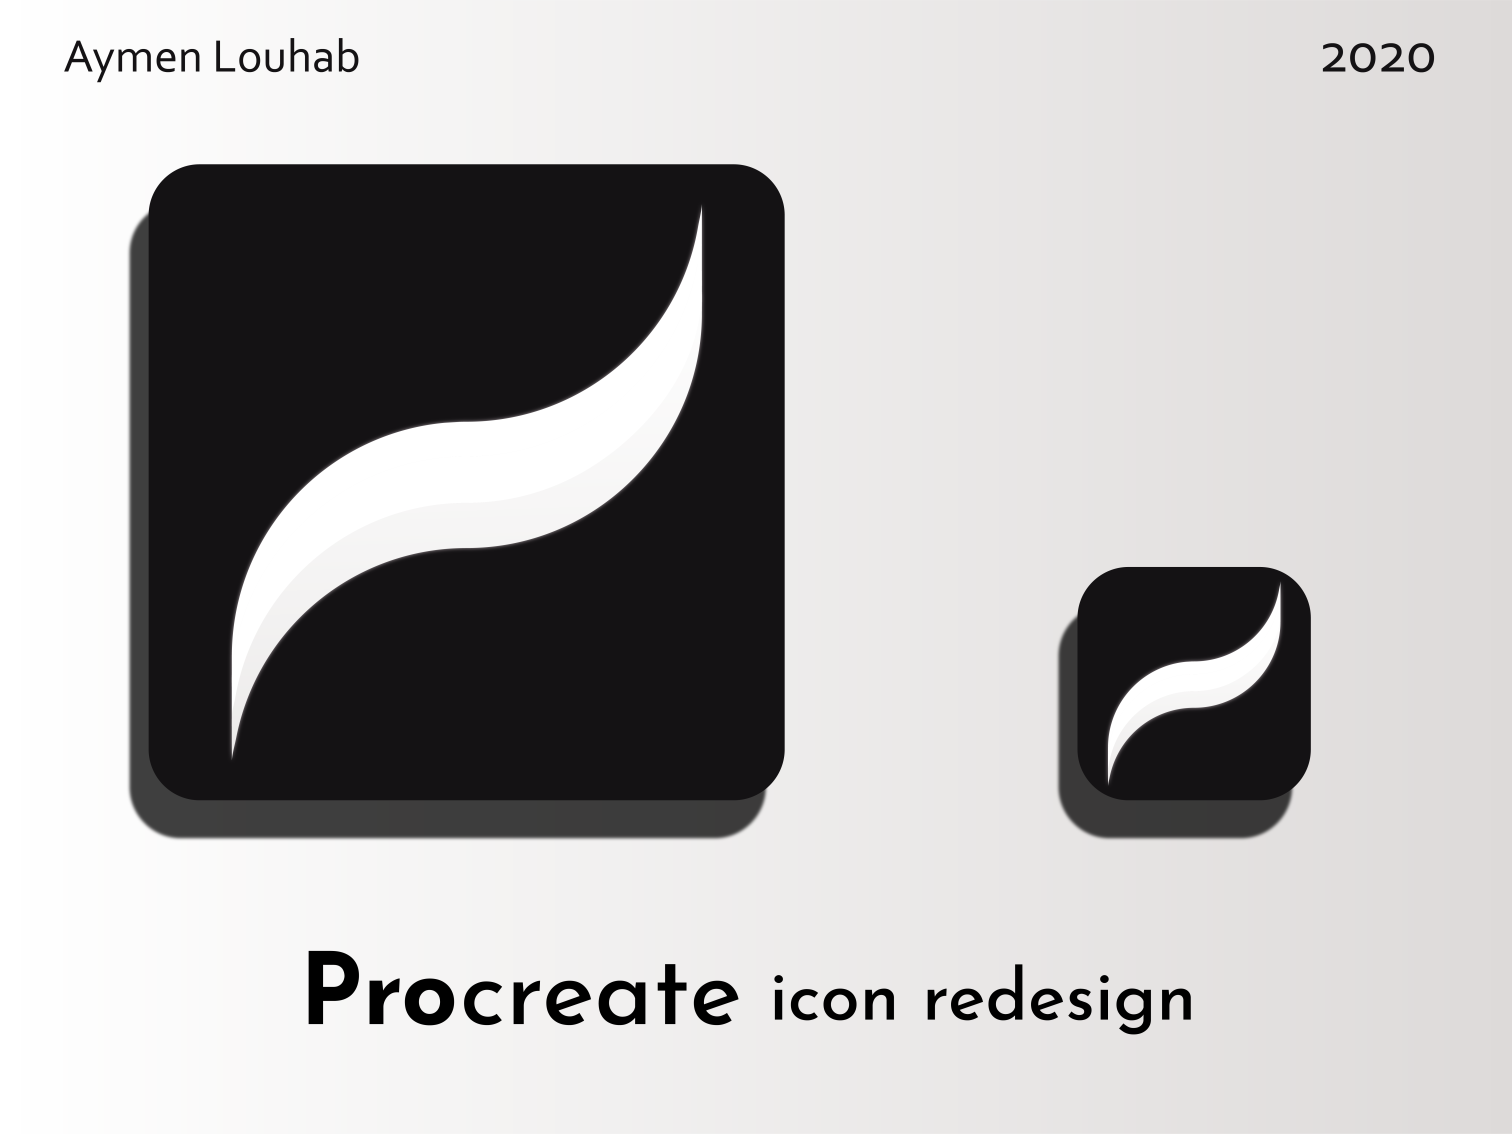 procreate-icon-redesign-by-louhab-aymen-on-dribbble